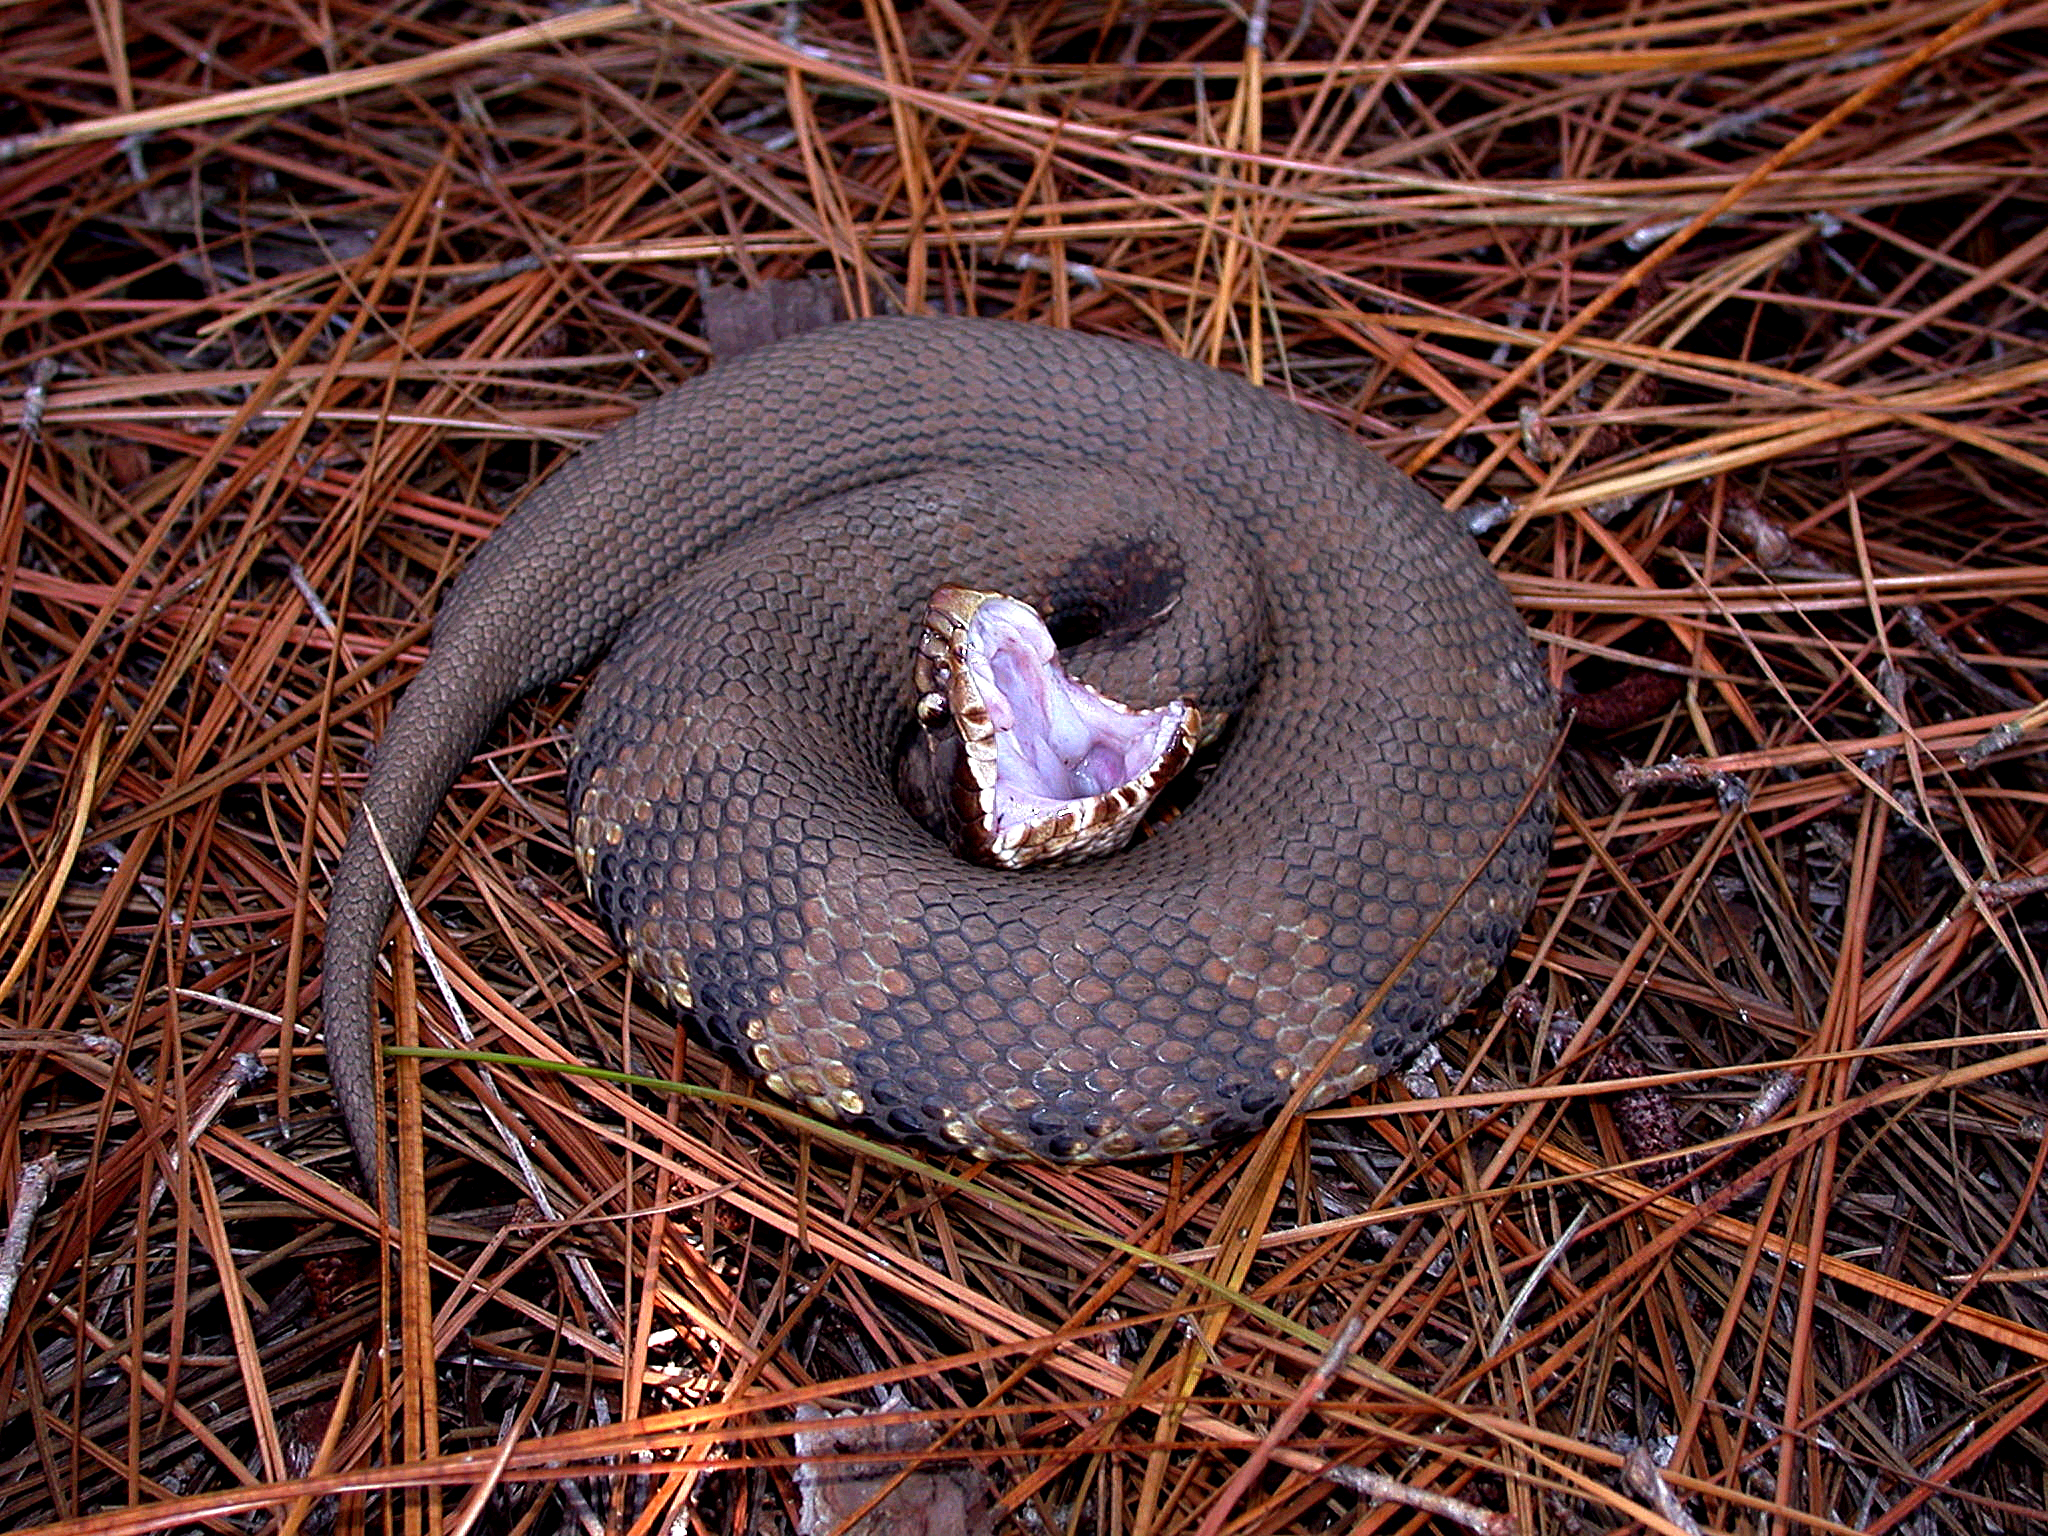 Adult cottonmouth threat display. Image from the Centers for Disease Control and Prevention's Public Health Image Library; in the Public Domain. 